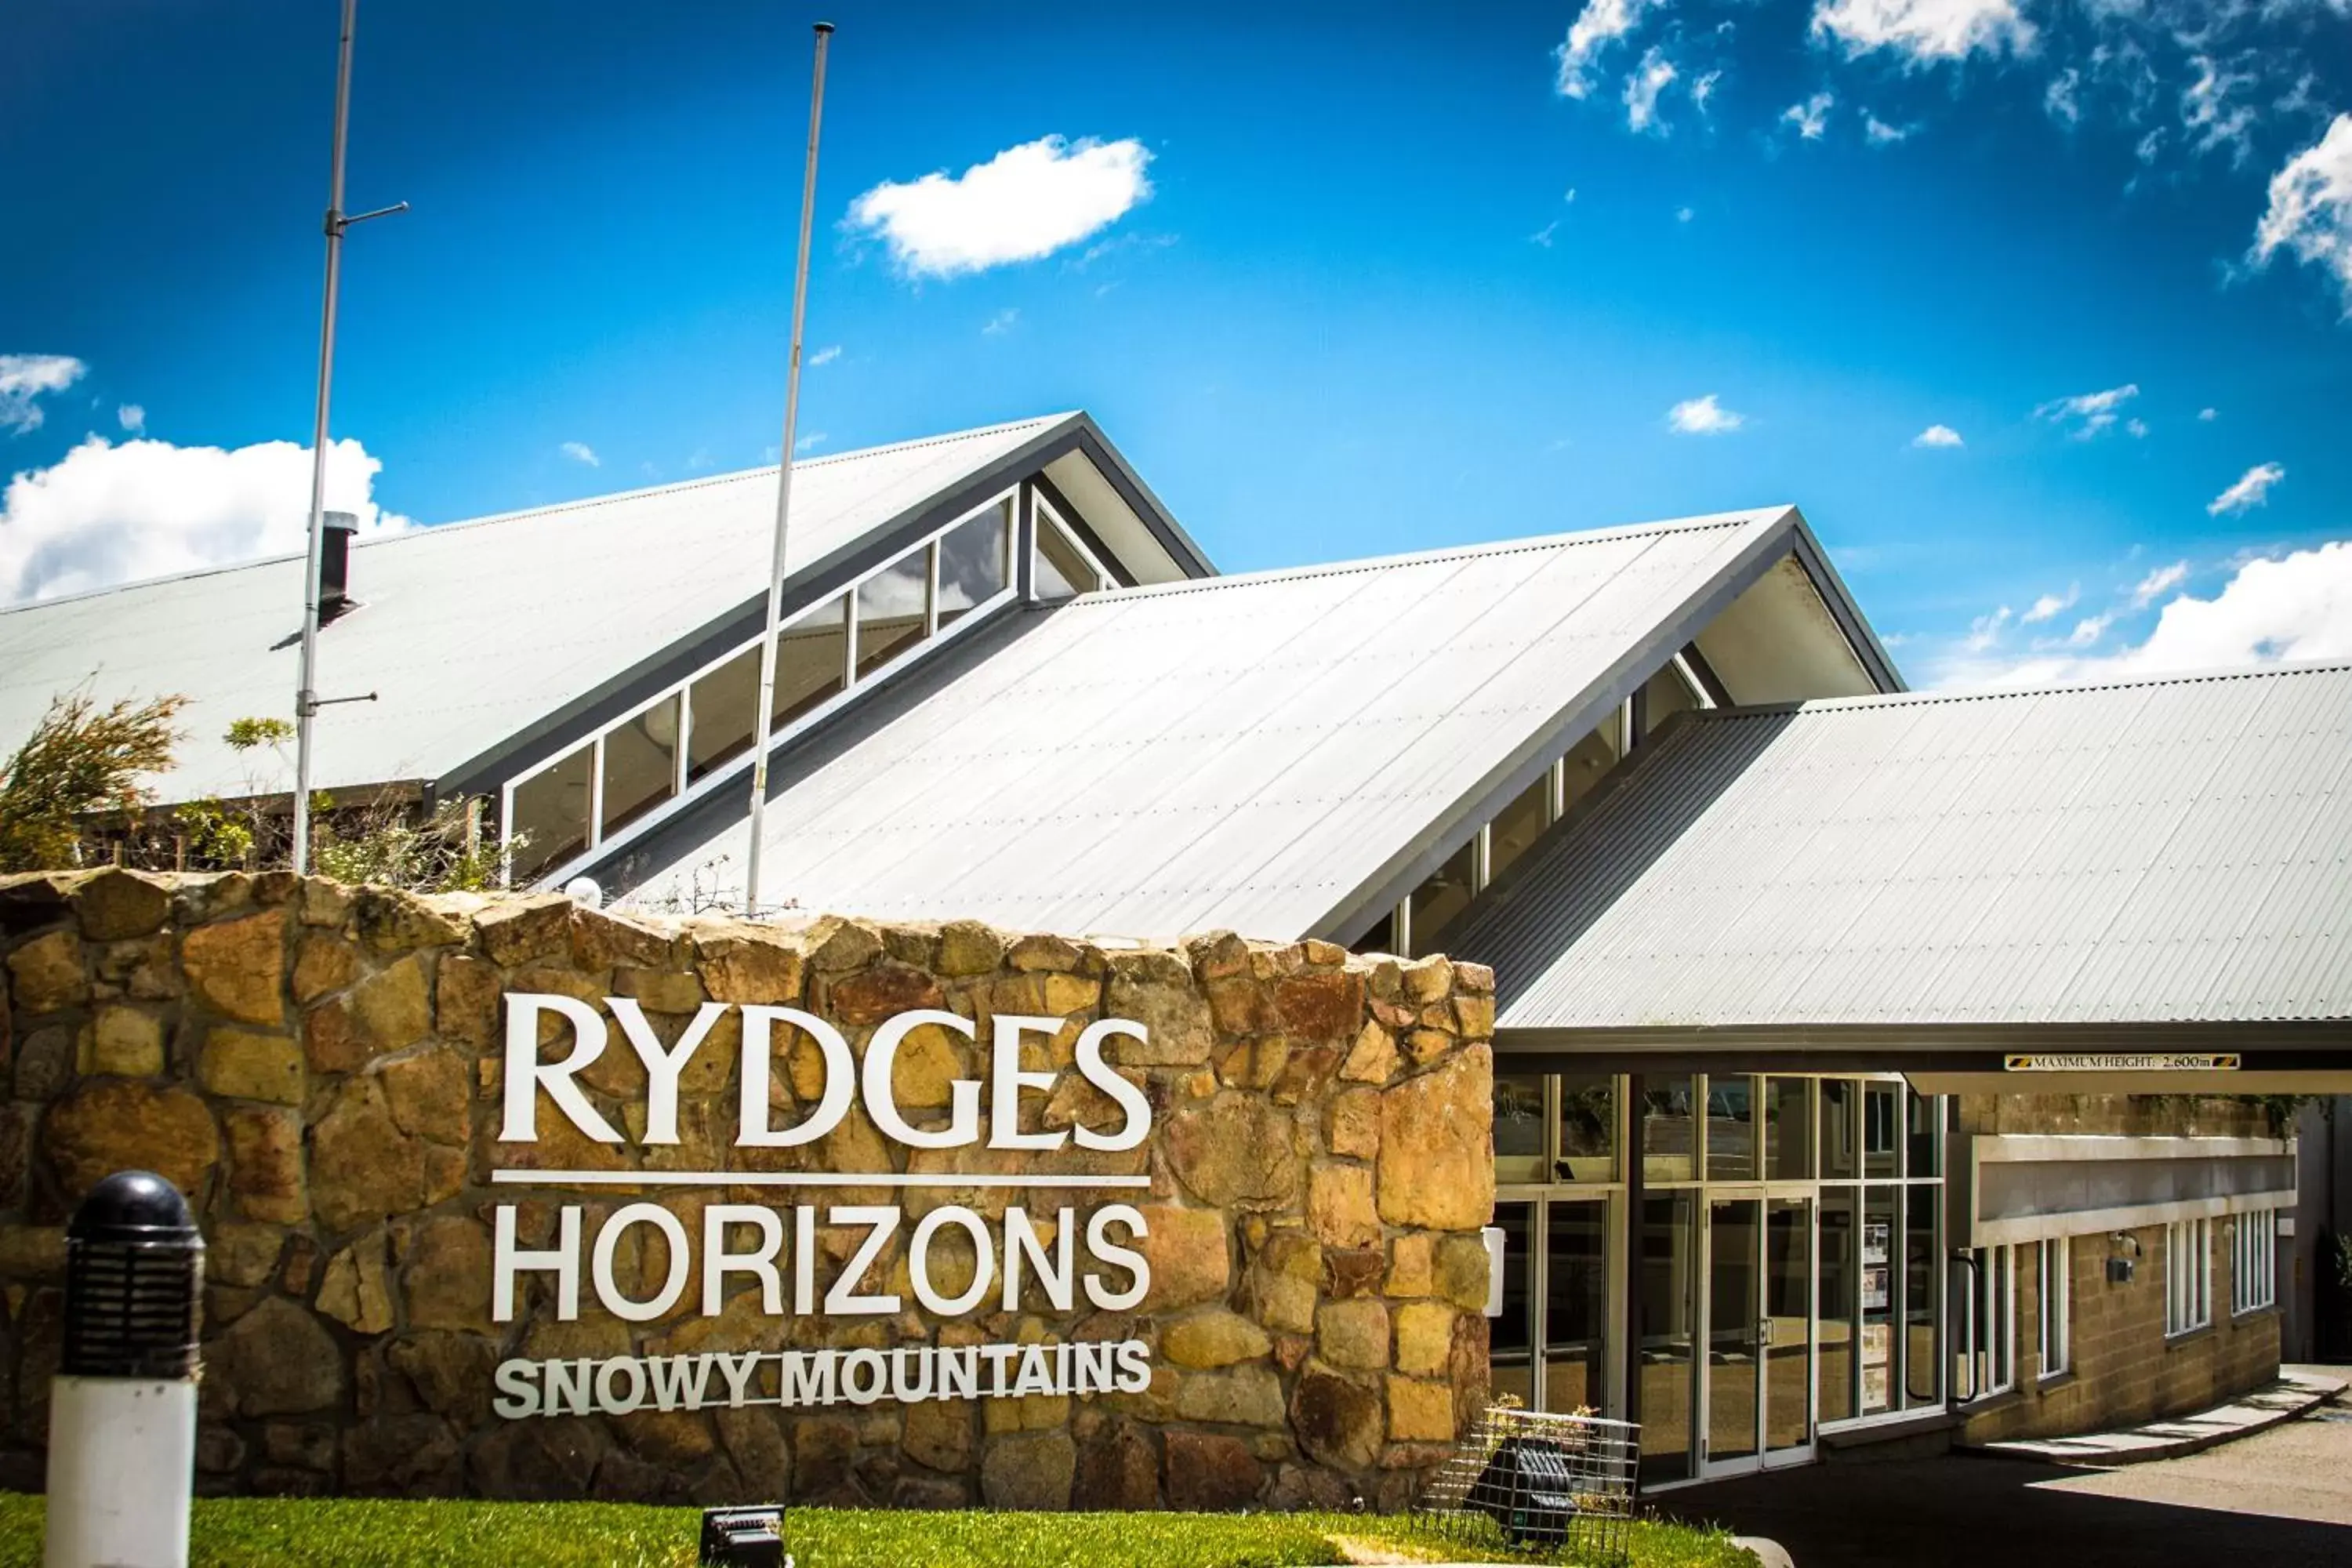 Facade/entrance, Property Building in Rydges Horizons Snowy Mountains